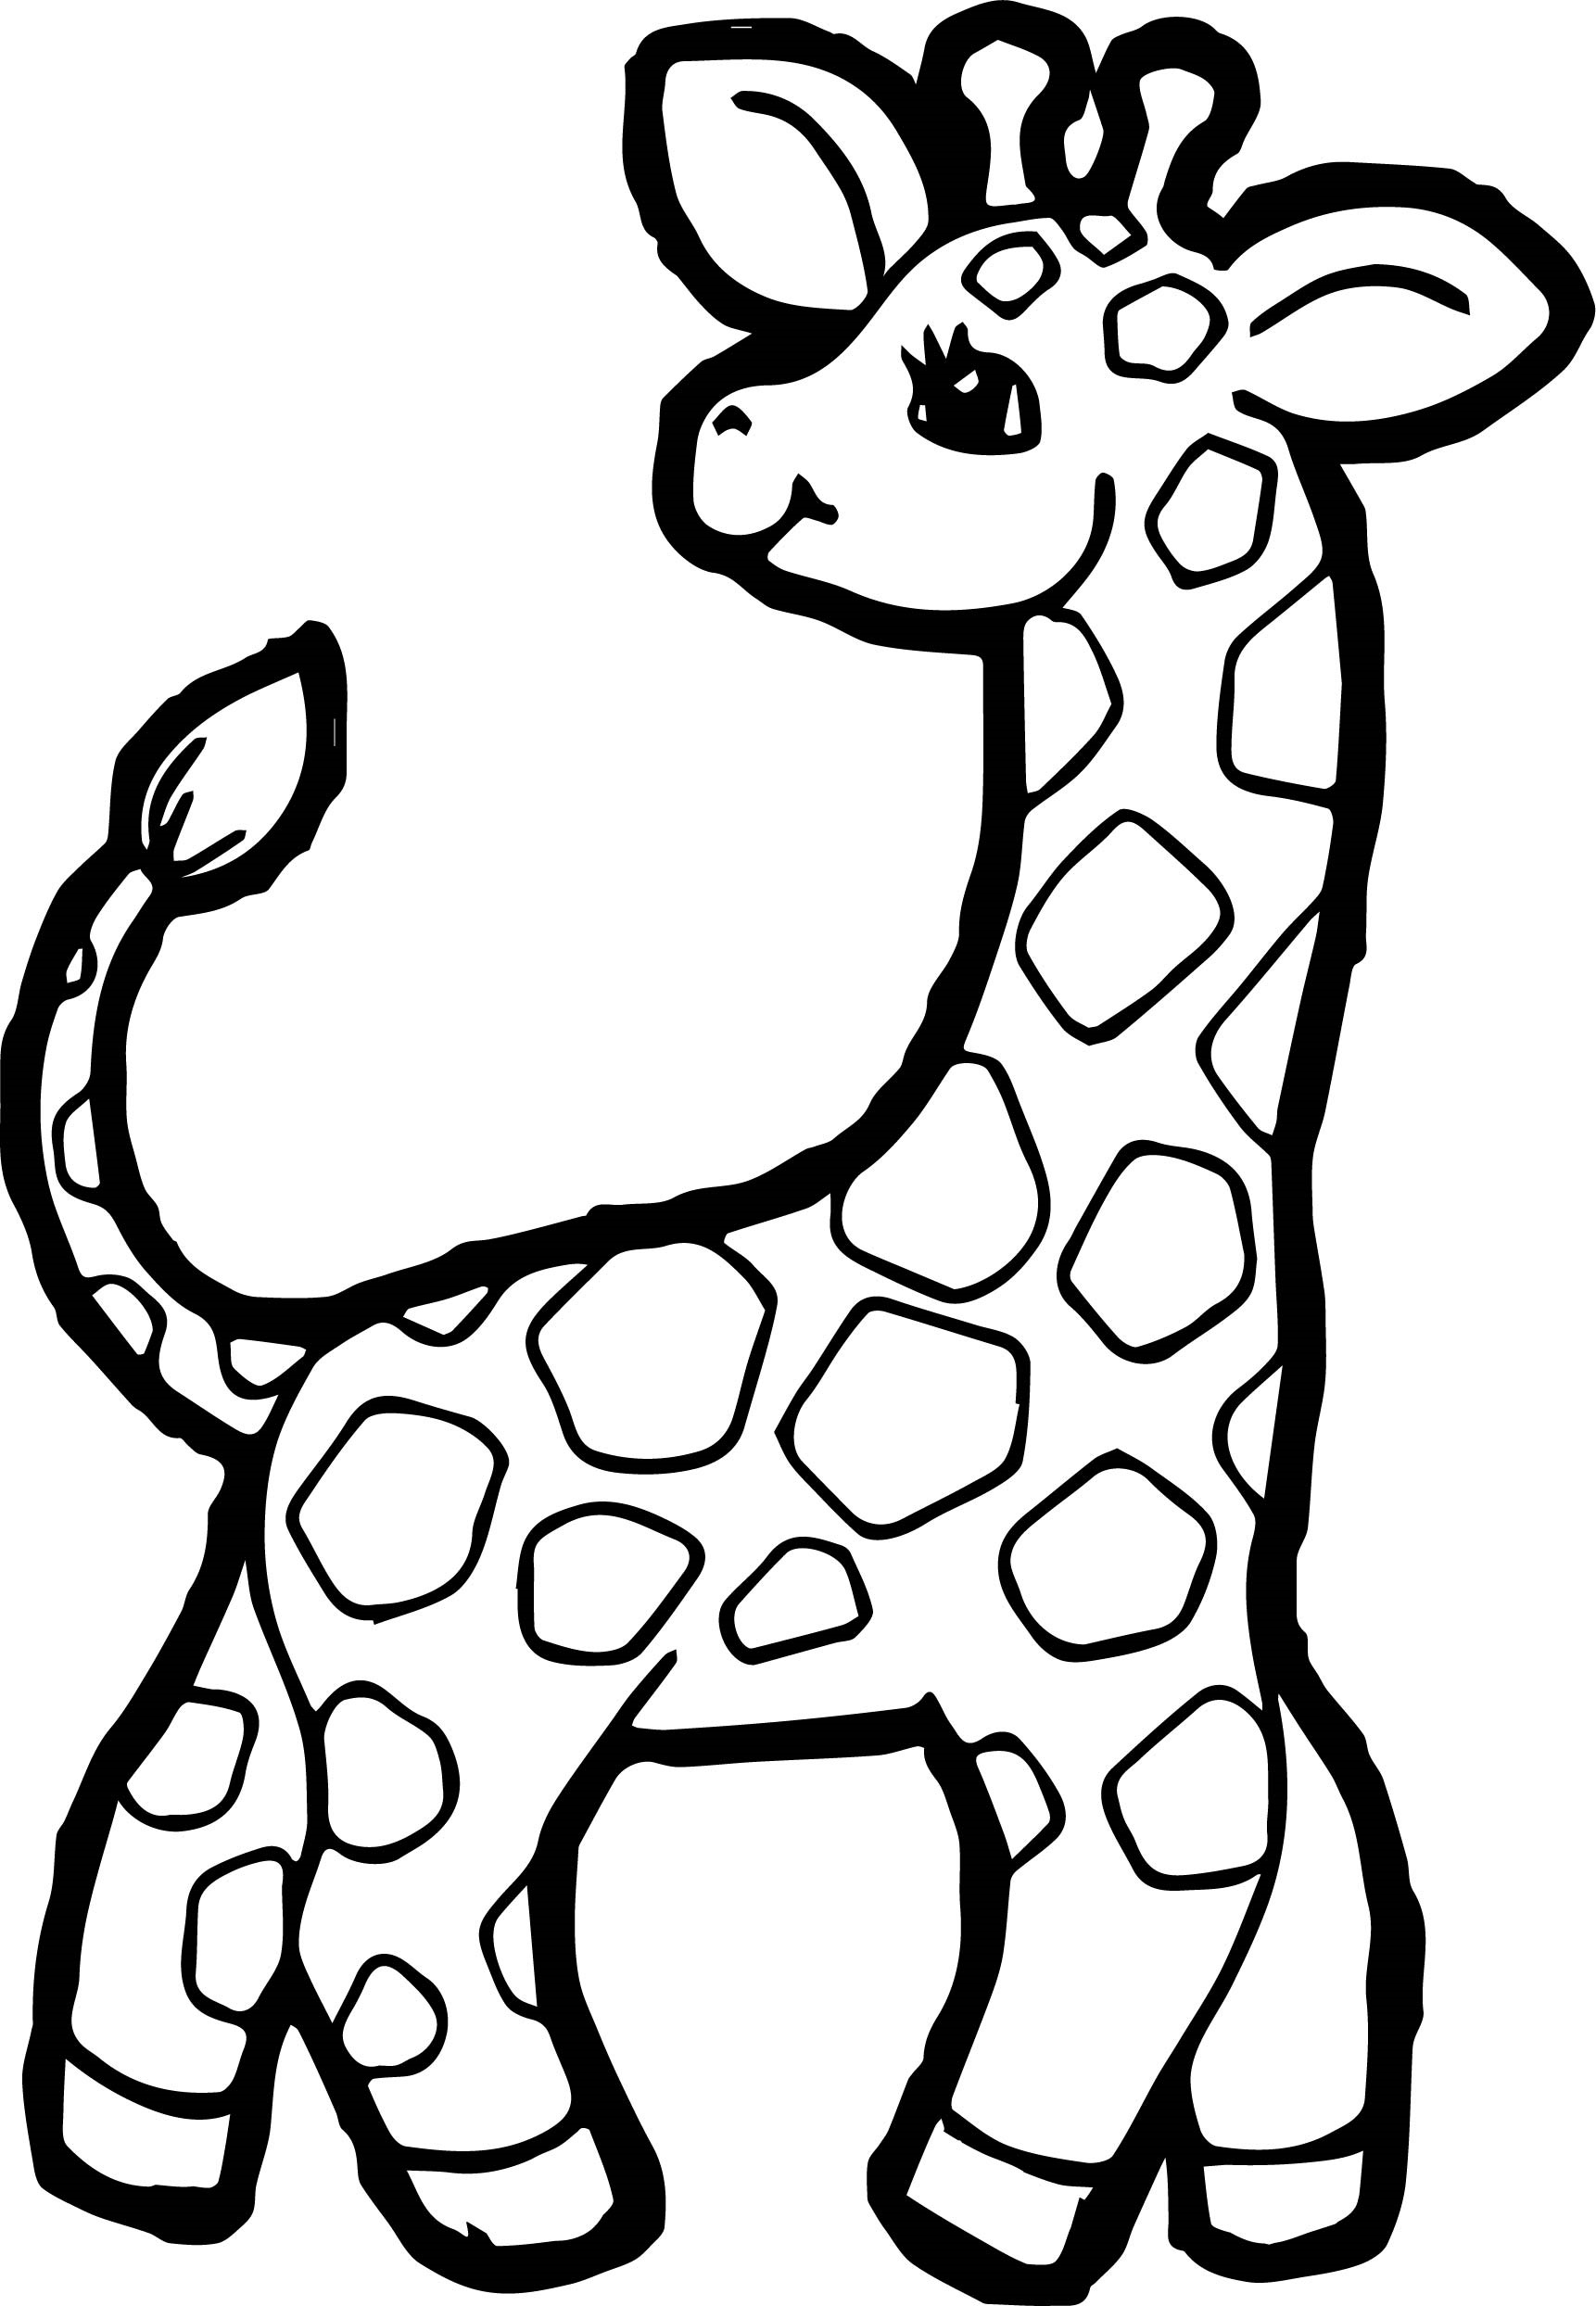 Giraffe Coloring Pages | 100 Pictures Free Printable